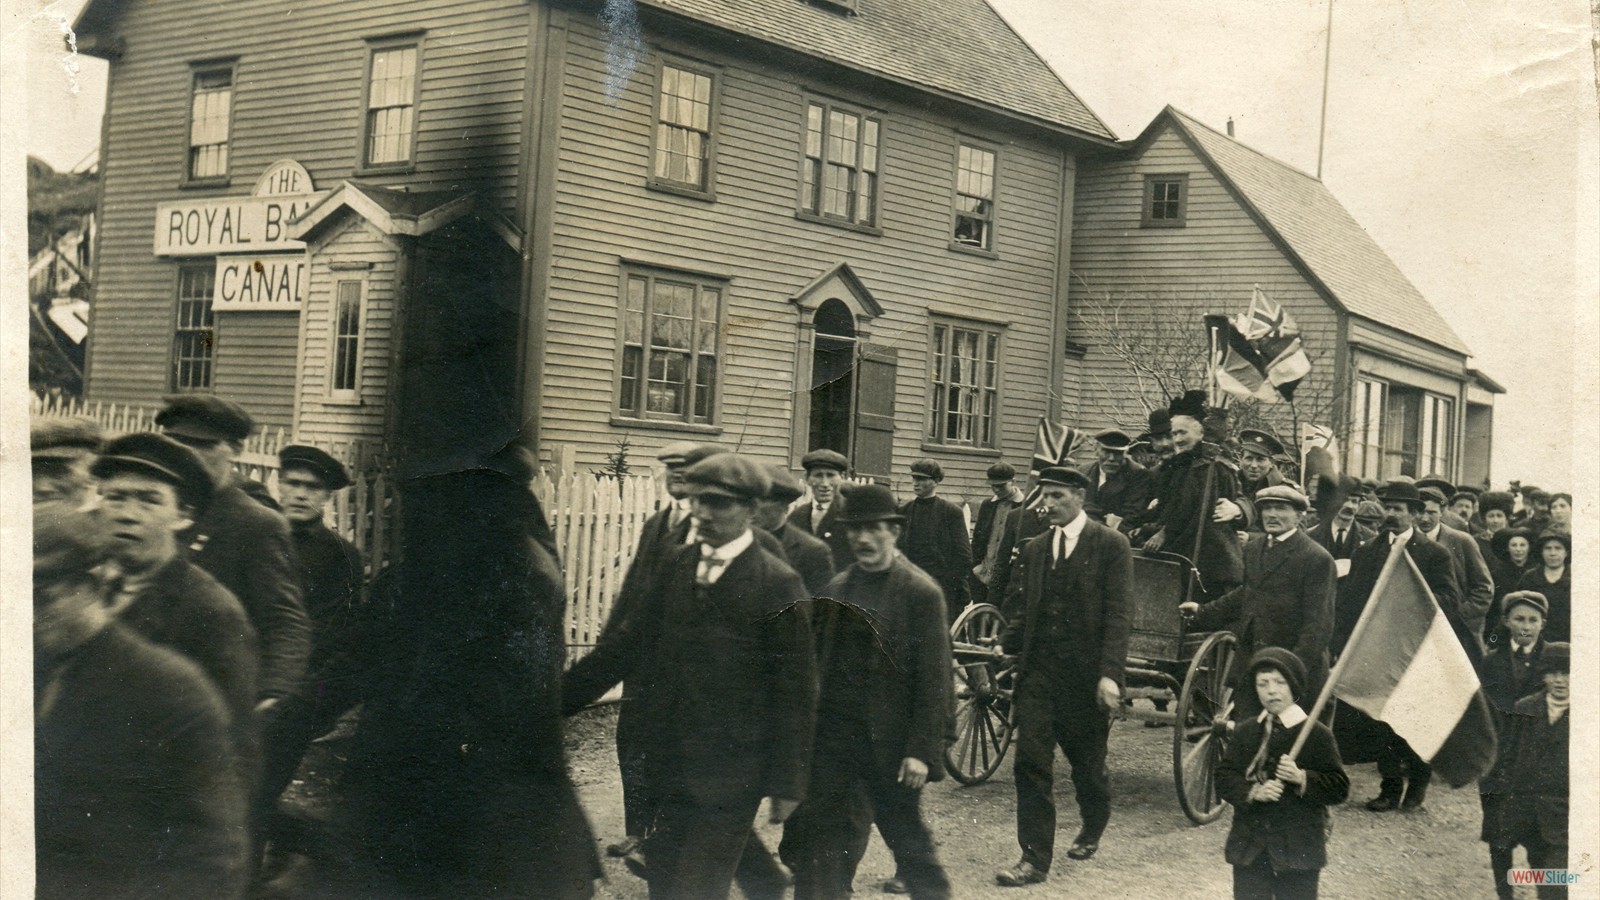 Parade to Welcome Home William George Tibbs from the First World War, notice in this picture the Royal Bank that was at the Hiscock House, it opened in 1911